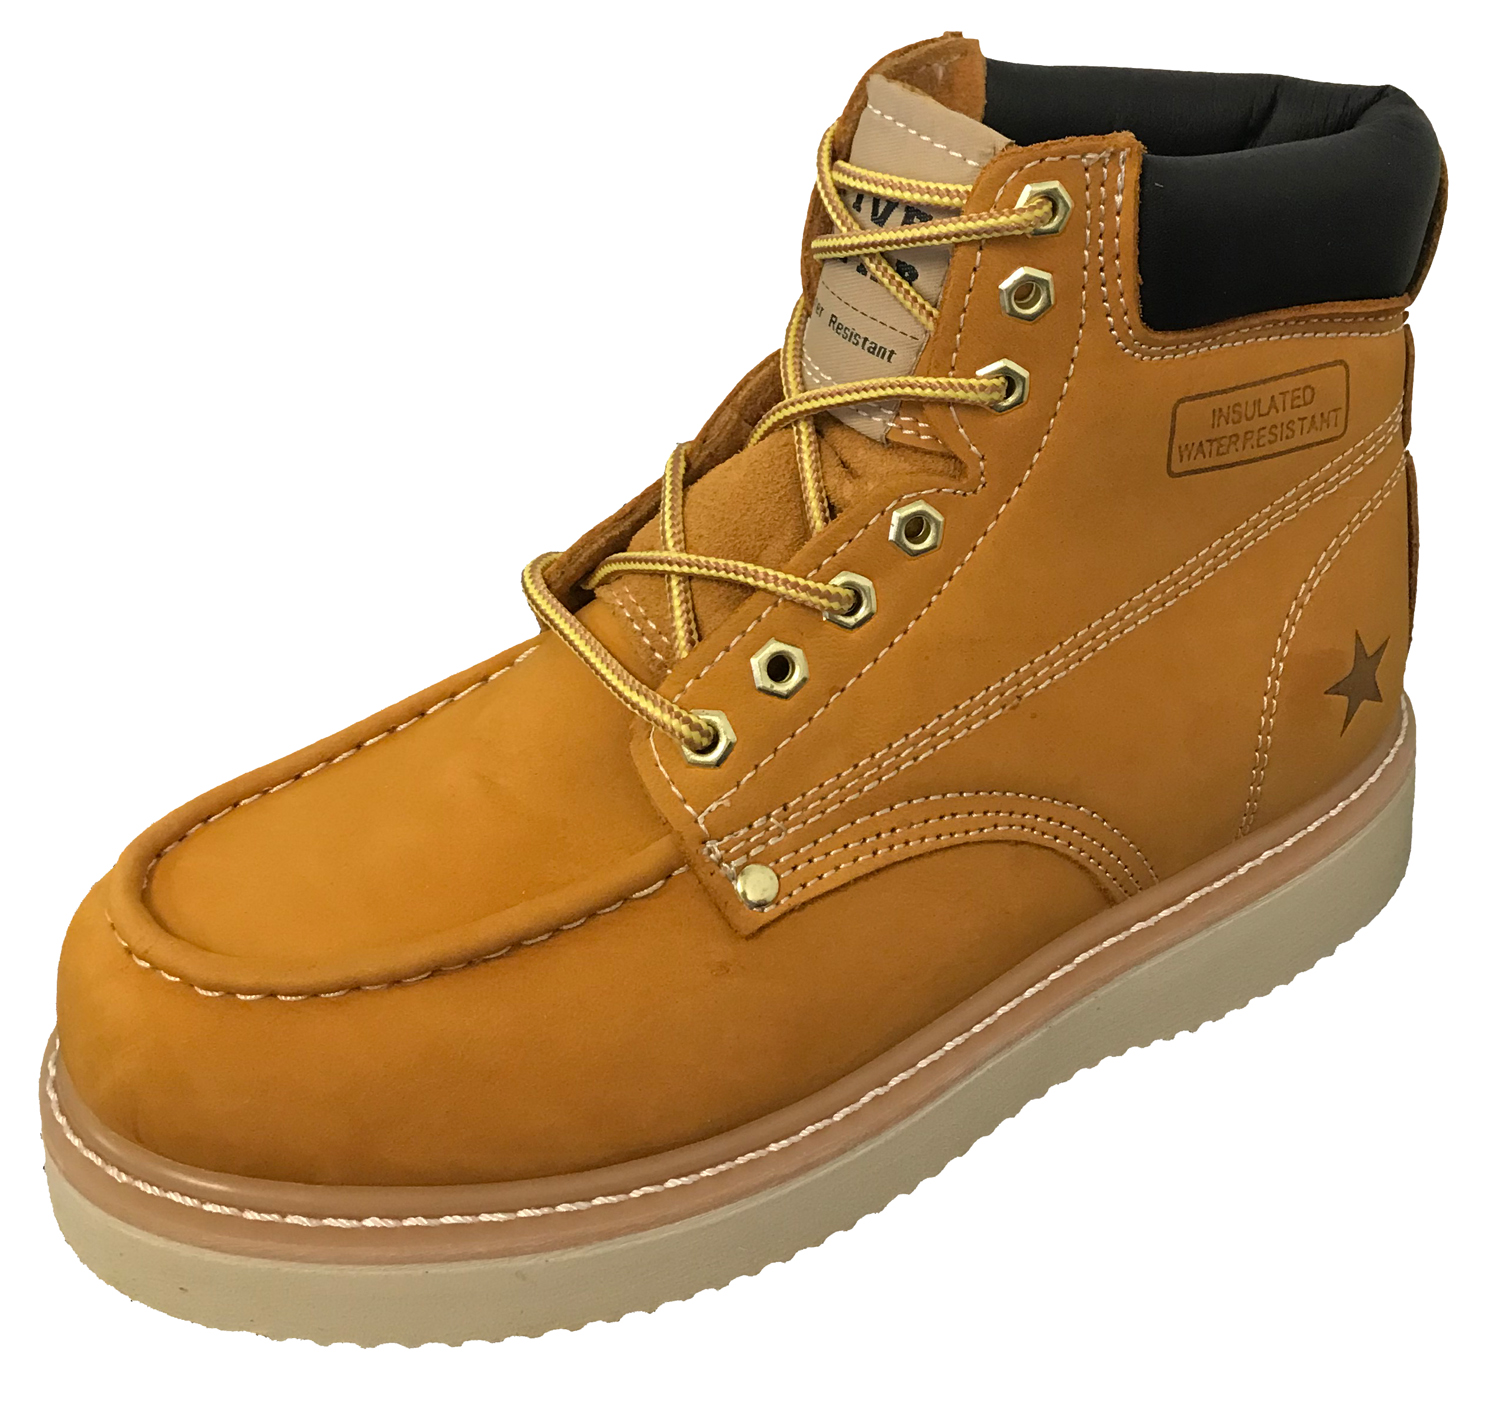 Men's Work Boots Genuine Leather Moc Toe 6" Classic Wedge Tred Sole Roofing Fashion Water/ Oil Resistant Insulated - image 1 of 4